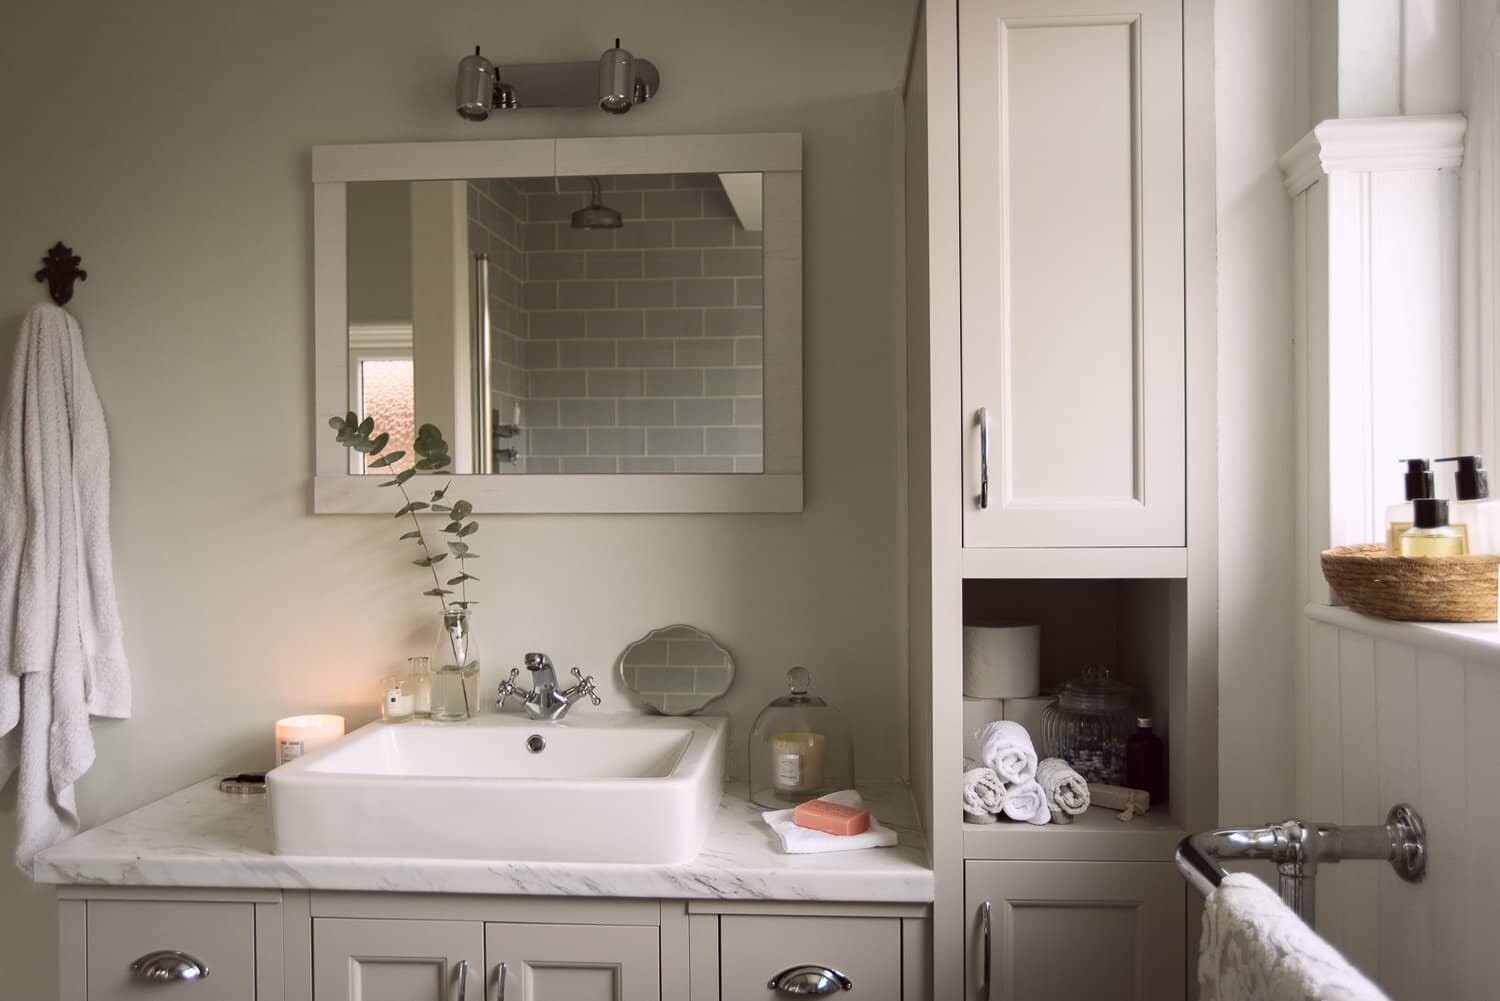 A Bathroom Renovation Cost, How Much Does It Cost To Redo A Small Bathroom Uk